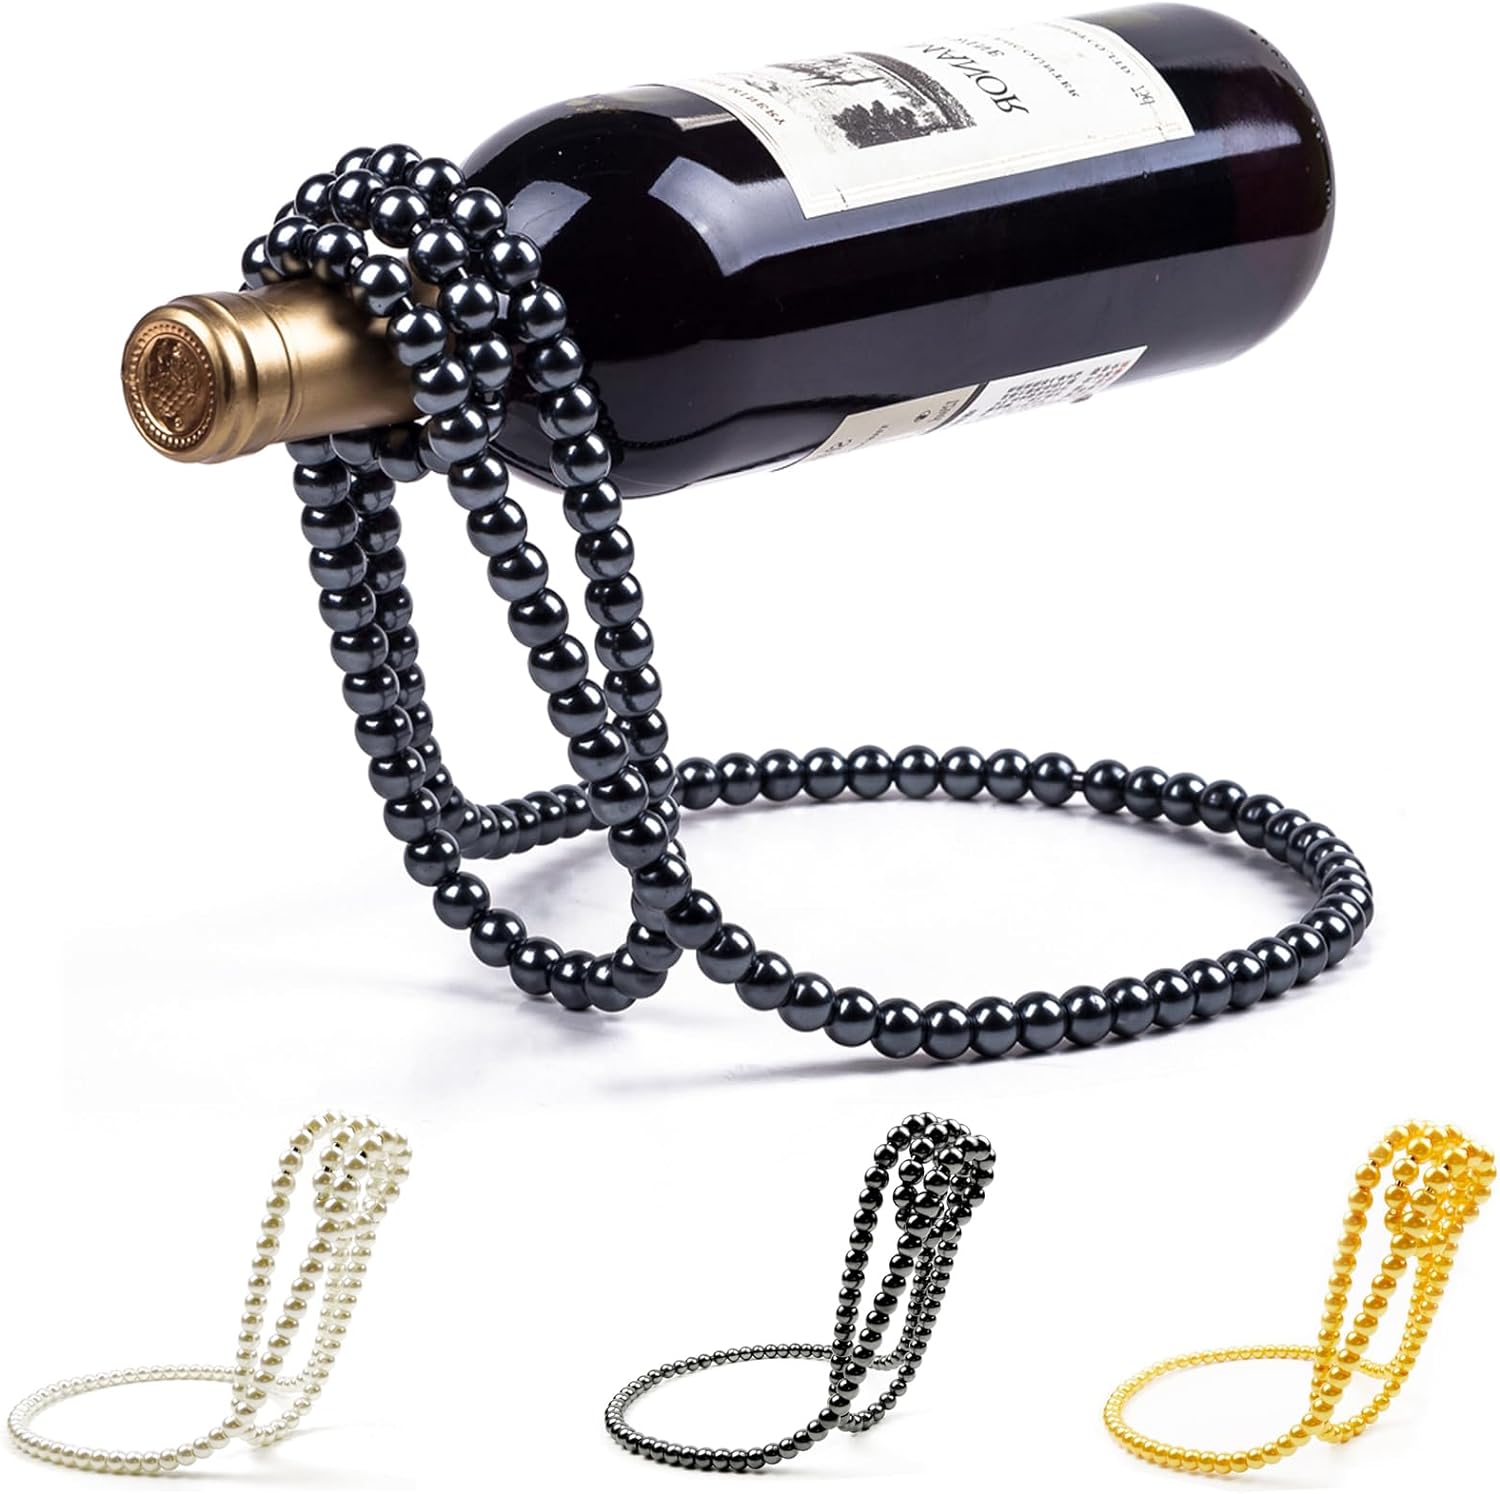 Pearl Necklace Shaped Floating Wine Bottle Holder, Creative Metal Chain Suspension Wine Rack, Magic Novelty Single Red Wine Bottle Stand for Bar&Home Decoration (White)